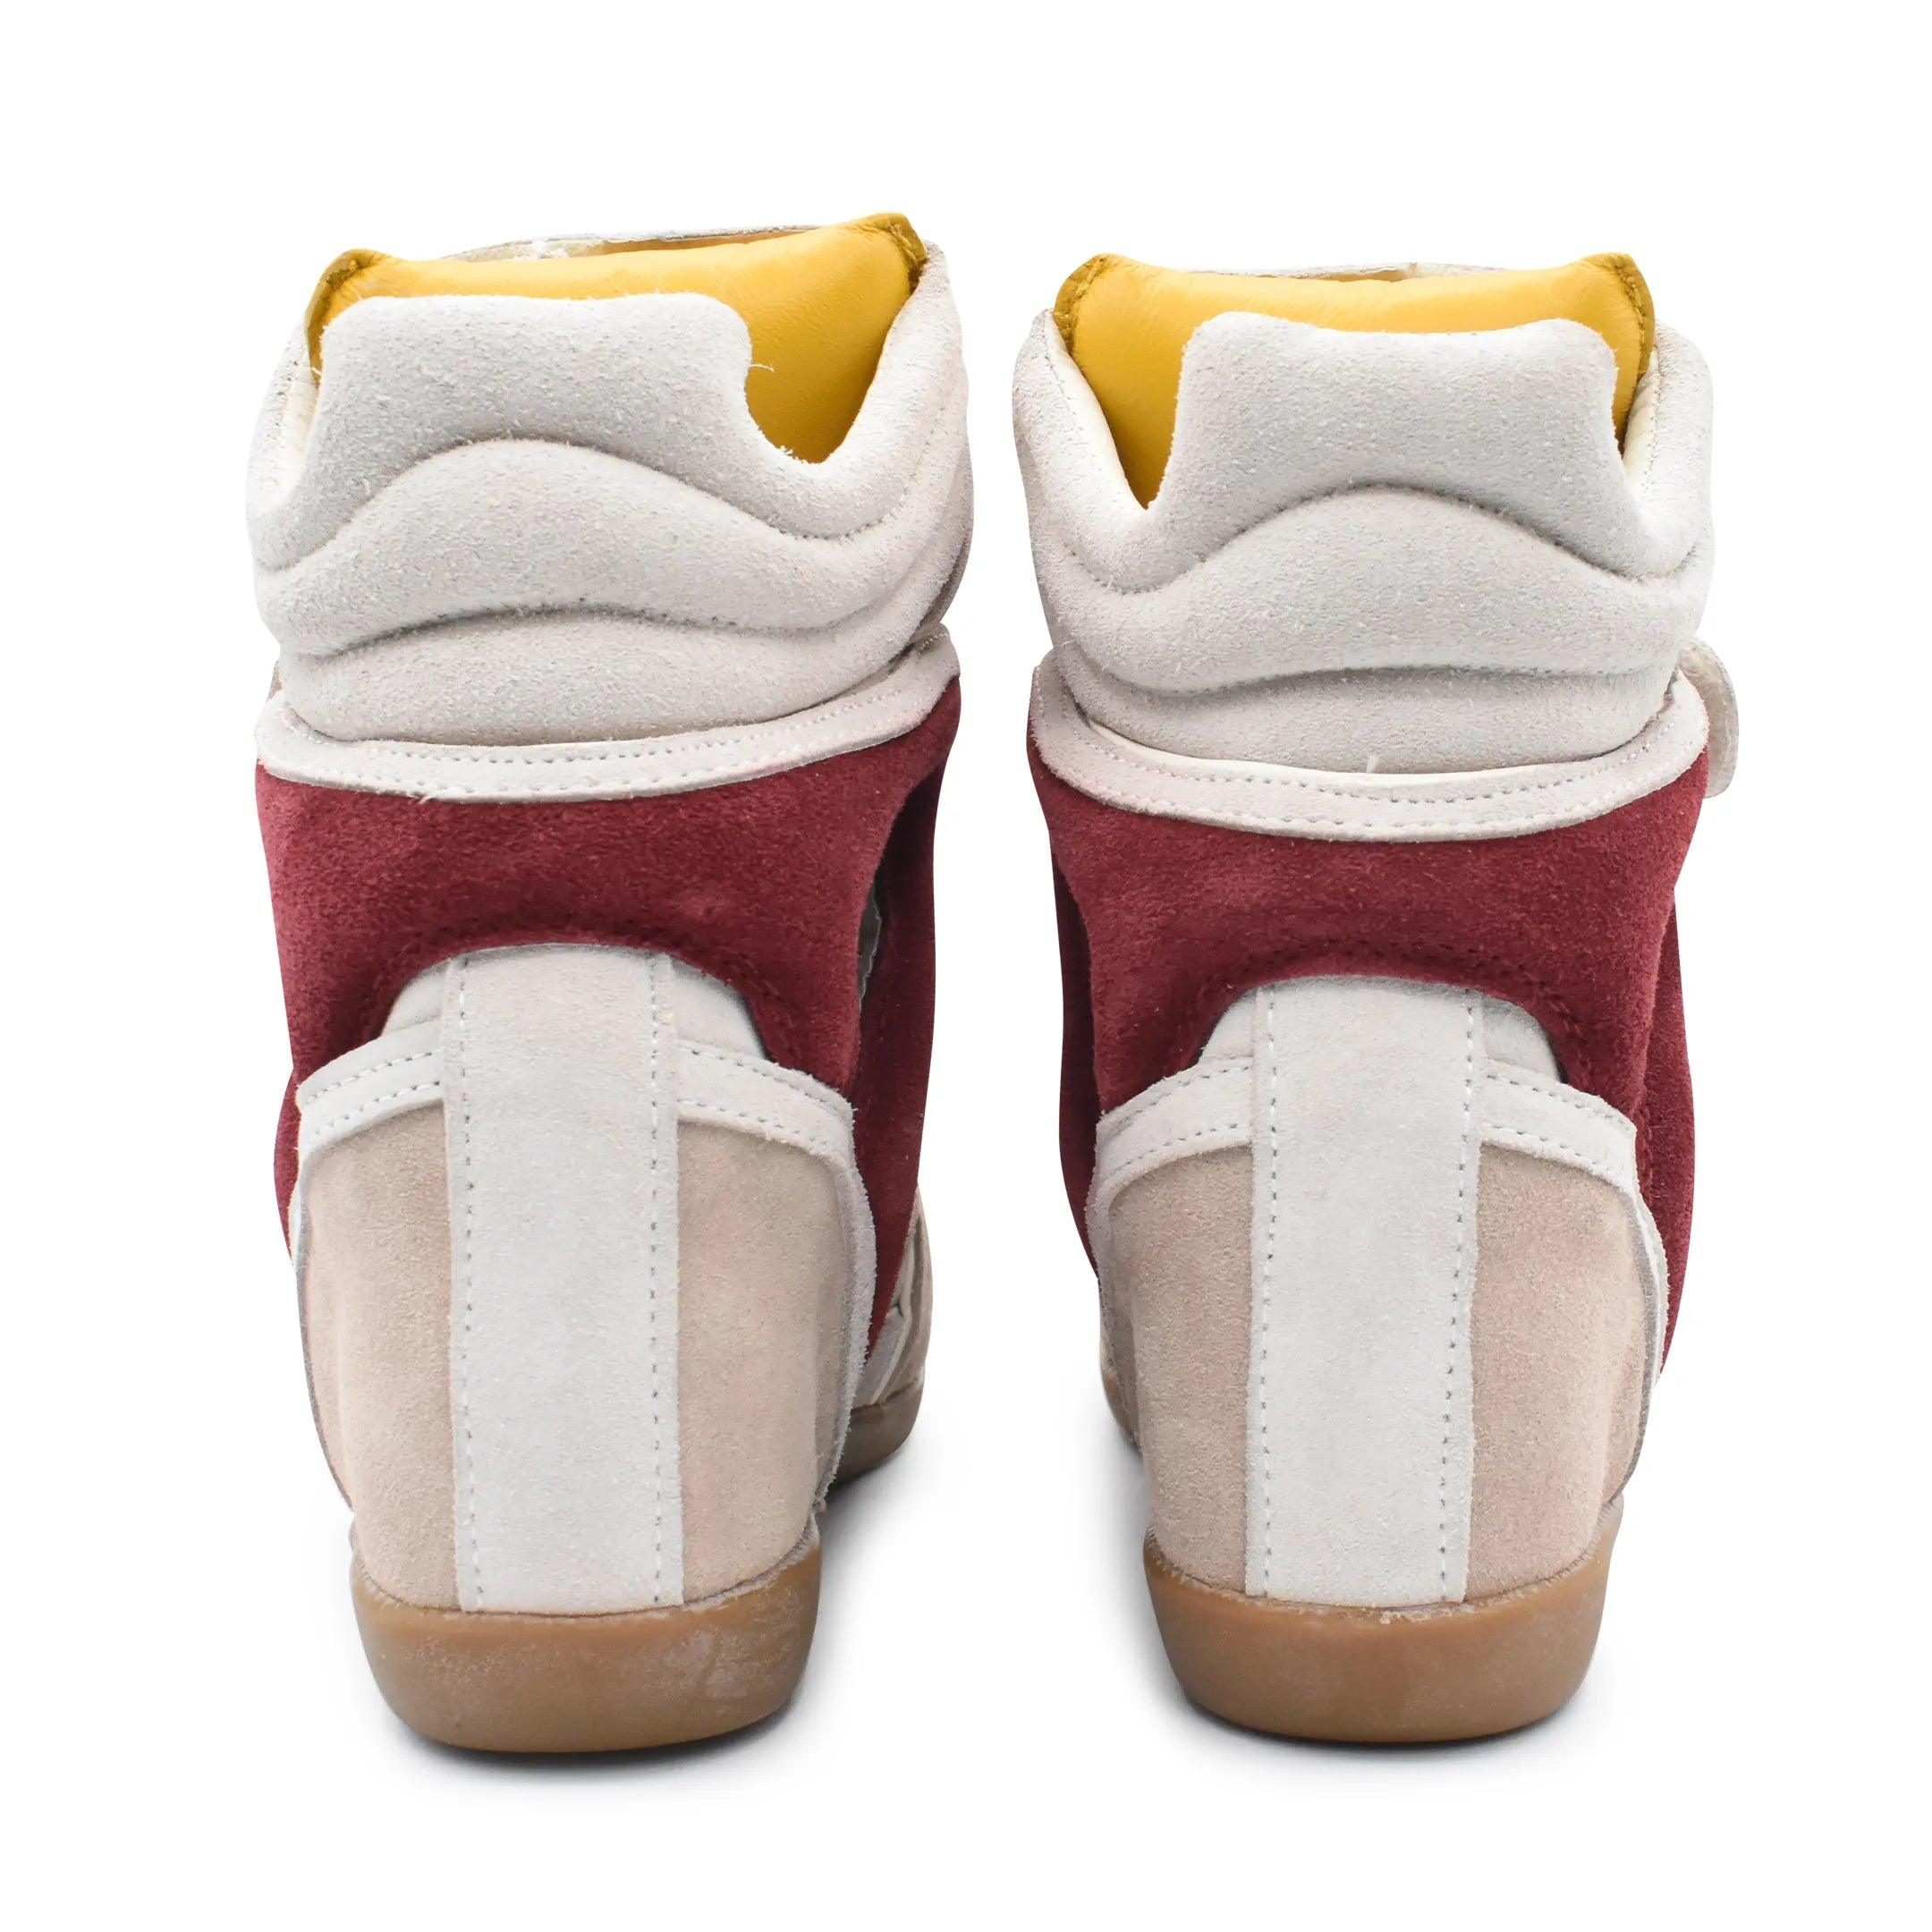 Isabel Marant Wedge Sneakers - Women's 36 - Fashionably Yours